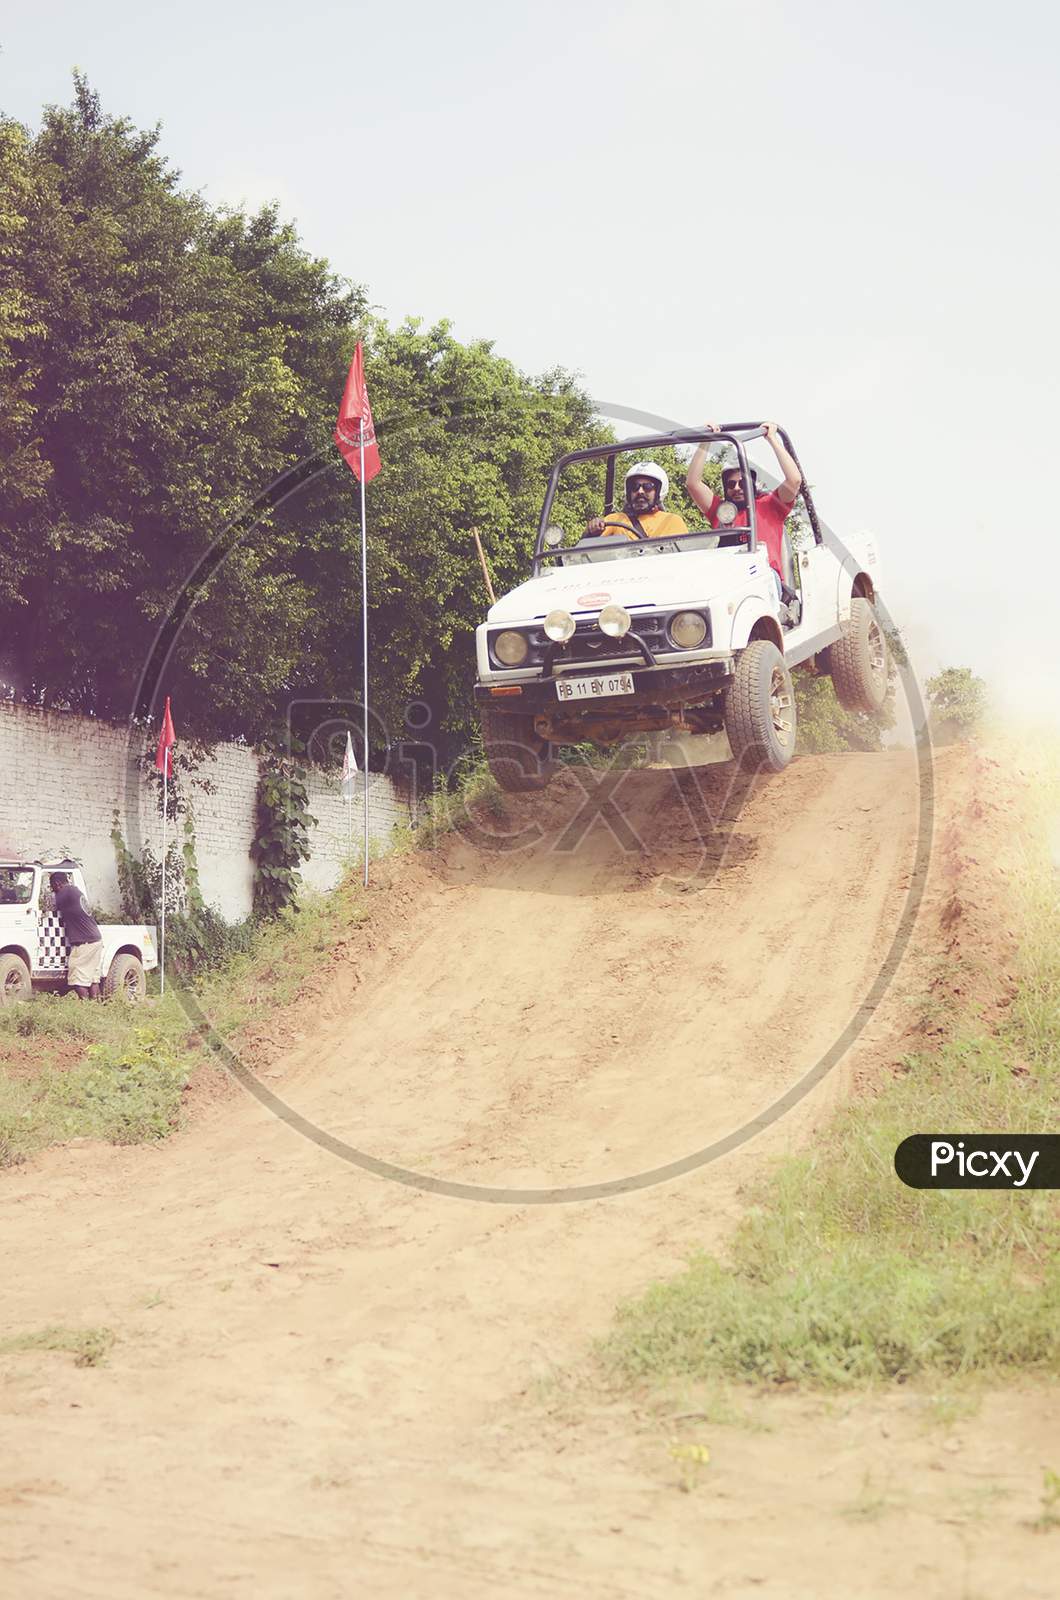 A Jeep during a rally race